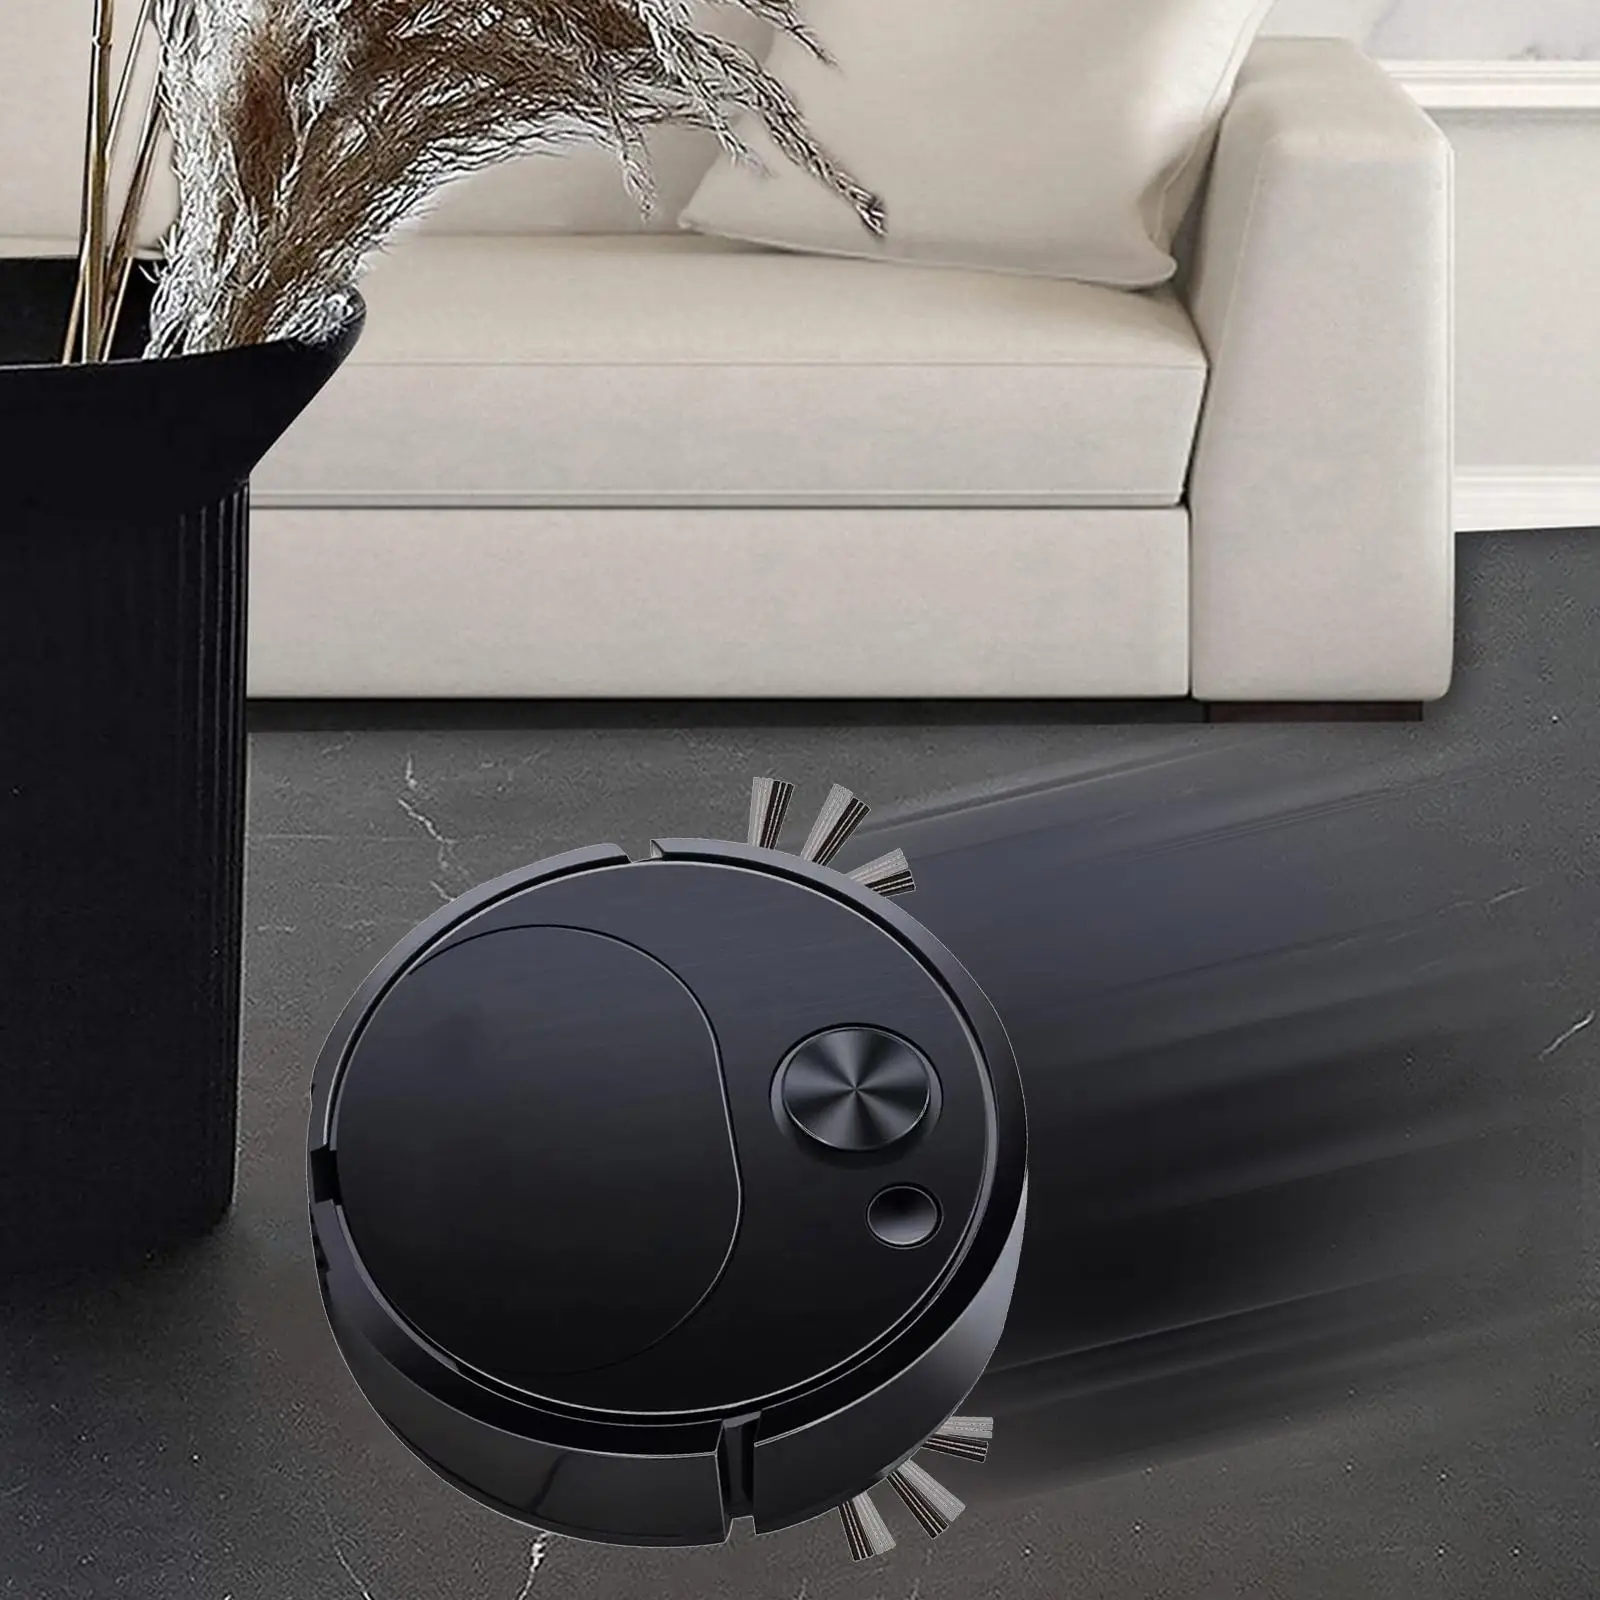 Robot Automatic Vacuum Cleaner 400mAh Robot Vacuums for Marble Pet Hair Dust